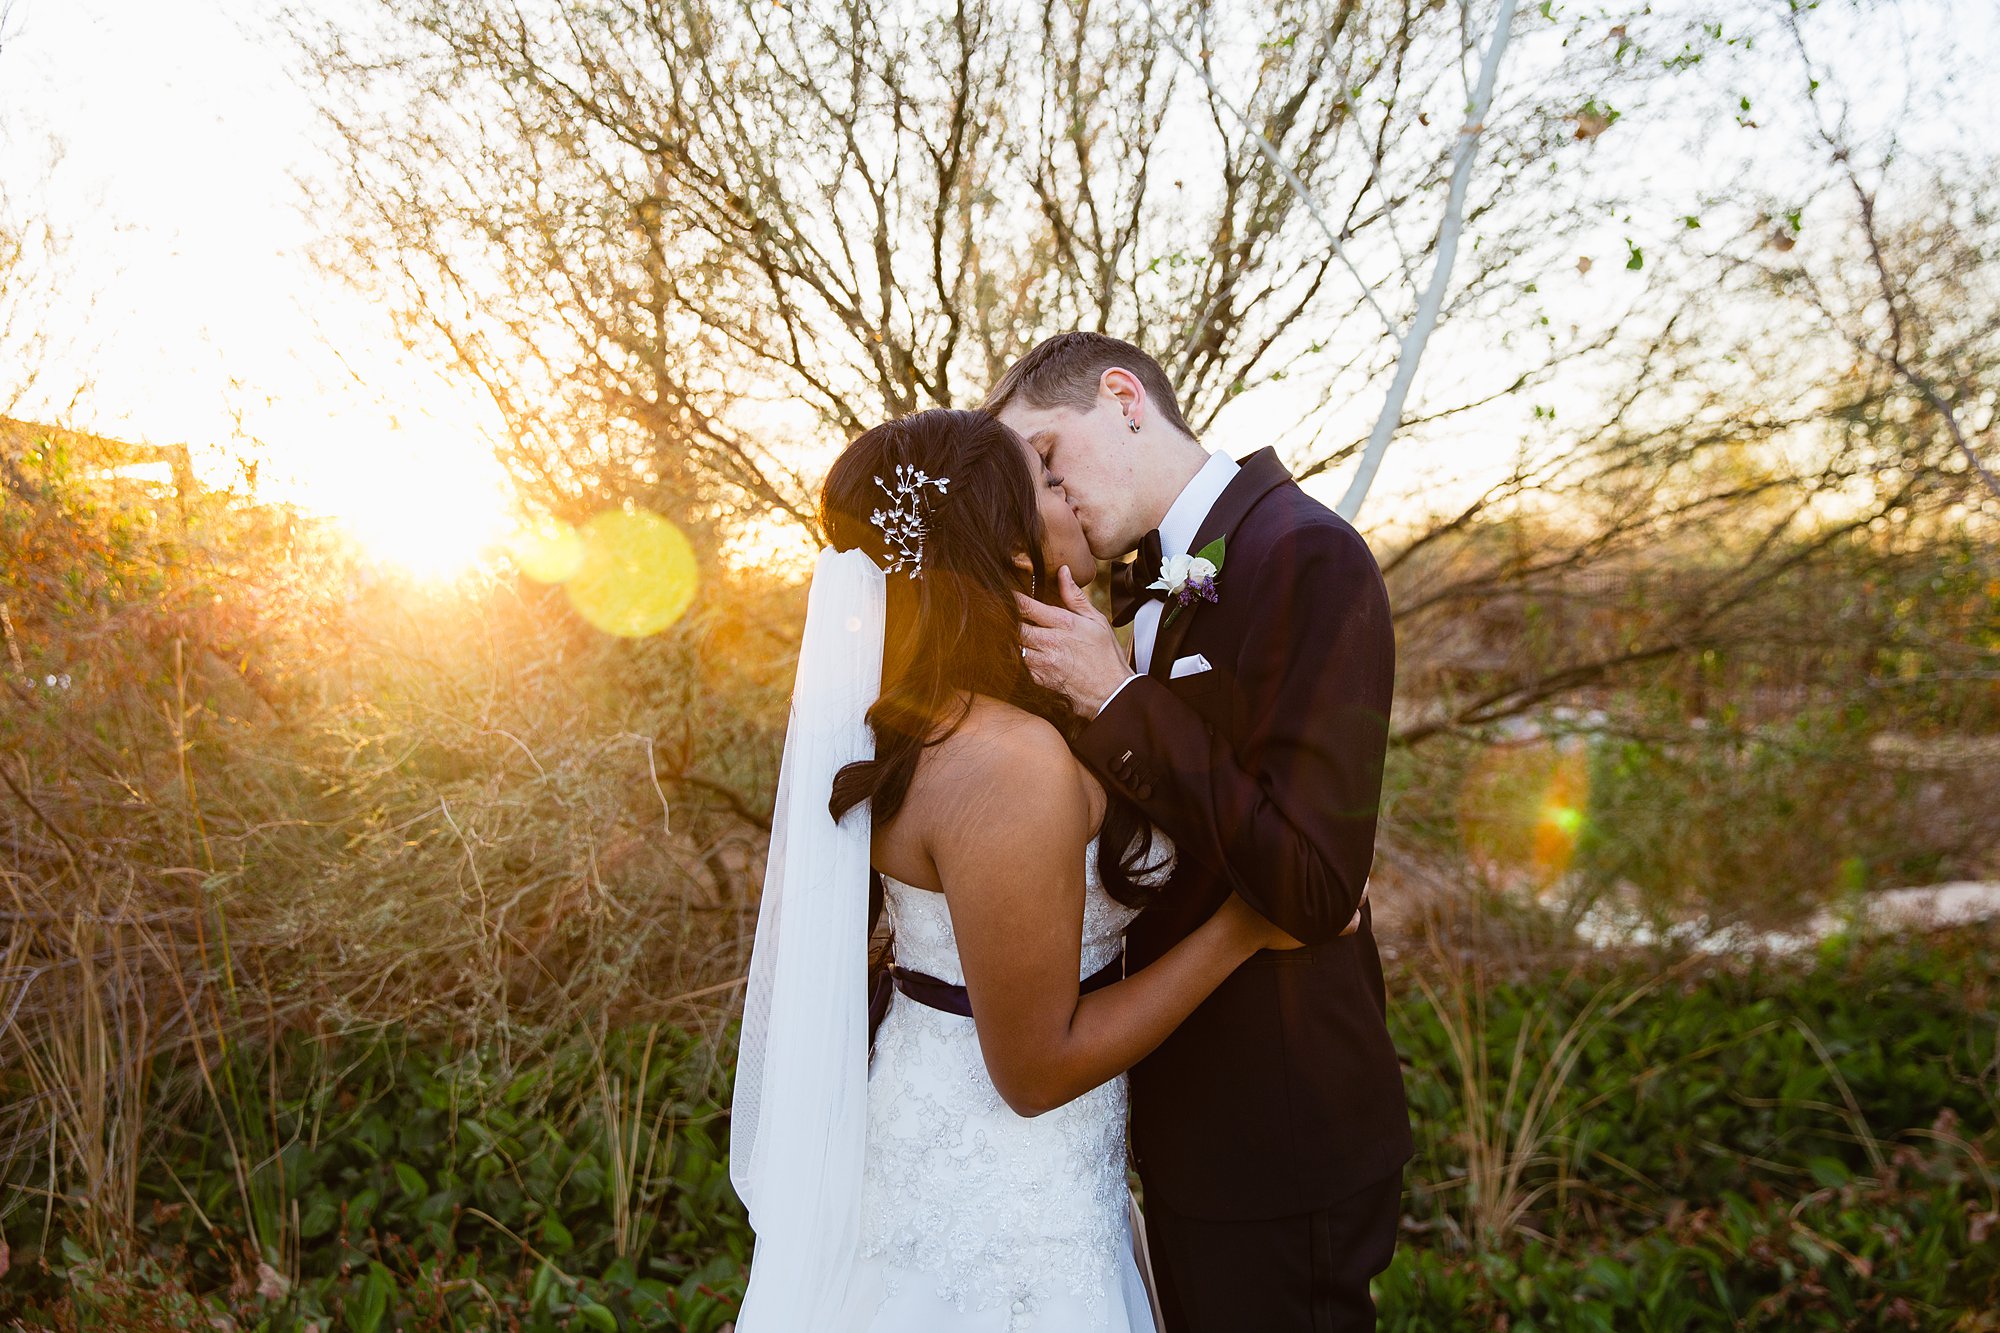 Sun flare in a photograph of a bride and groom kissing on their wedding day.